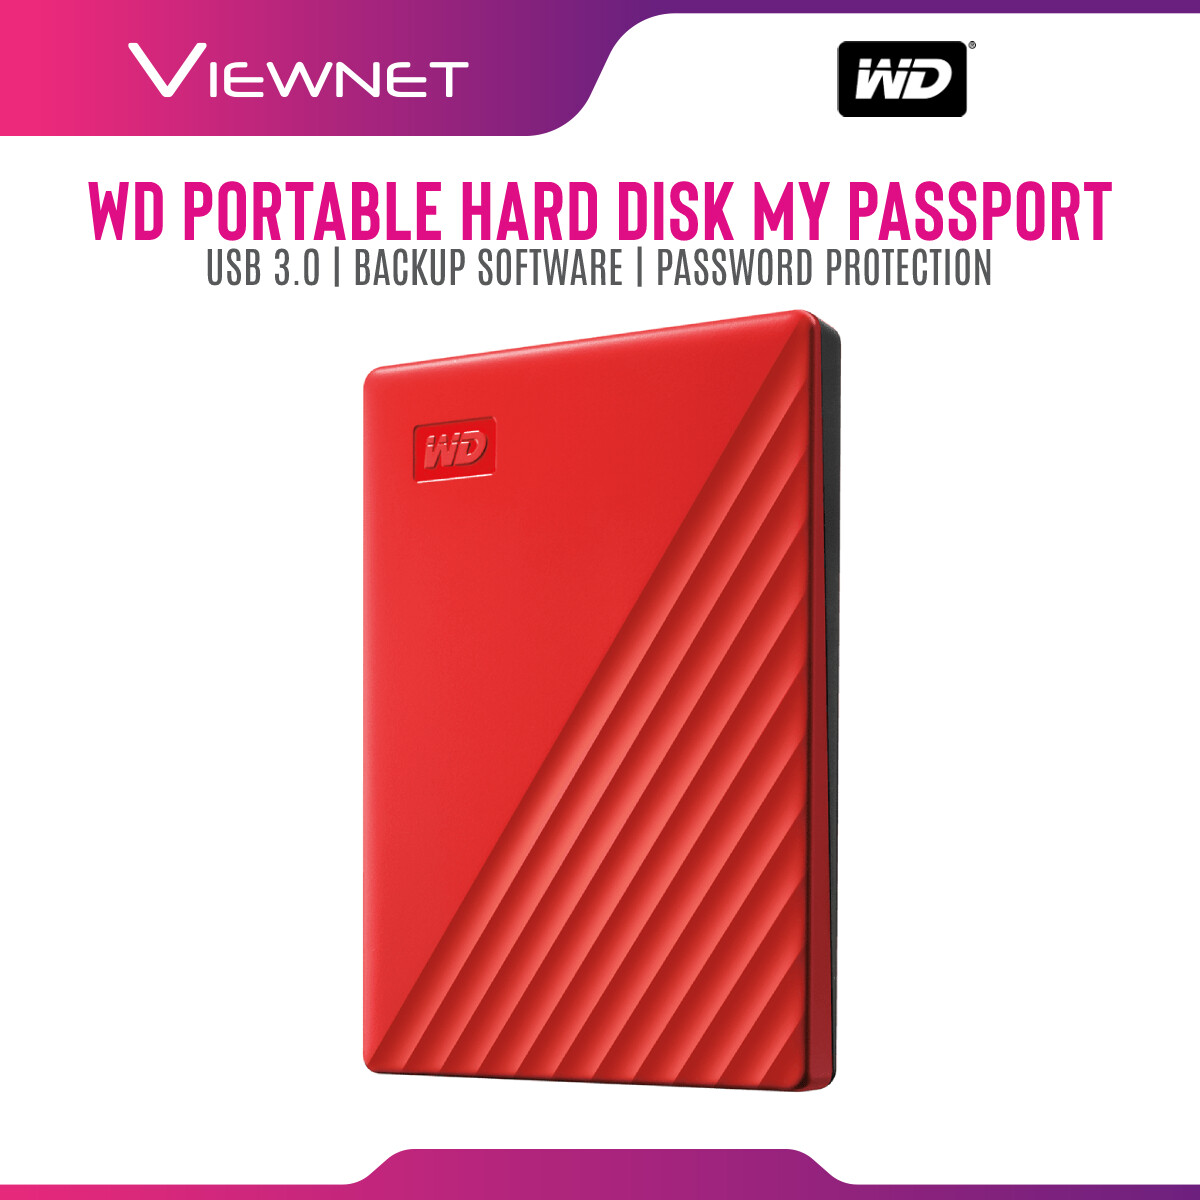 WD Western Digital My Passport 1TB / 2TB / 4TB / 5TB Slim Portable External Hard Disk USB 3.0 With WD Backup Software & Password Protection